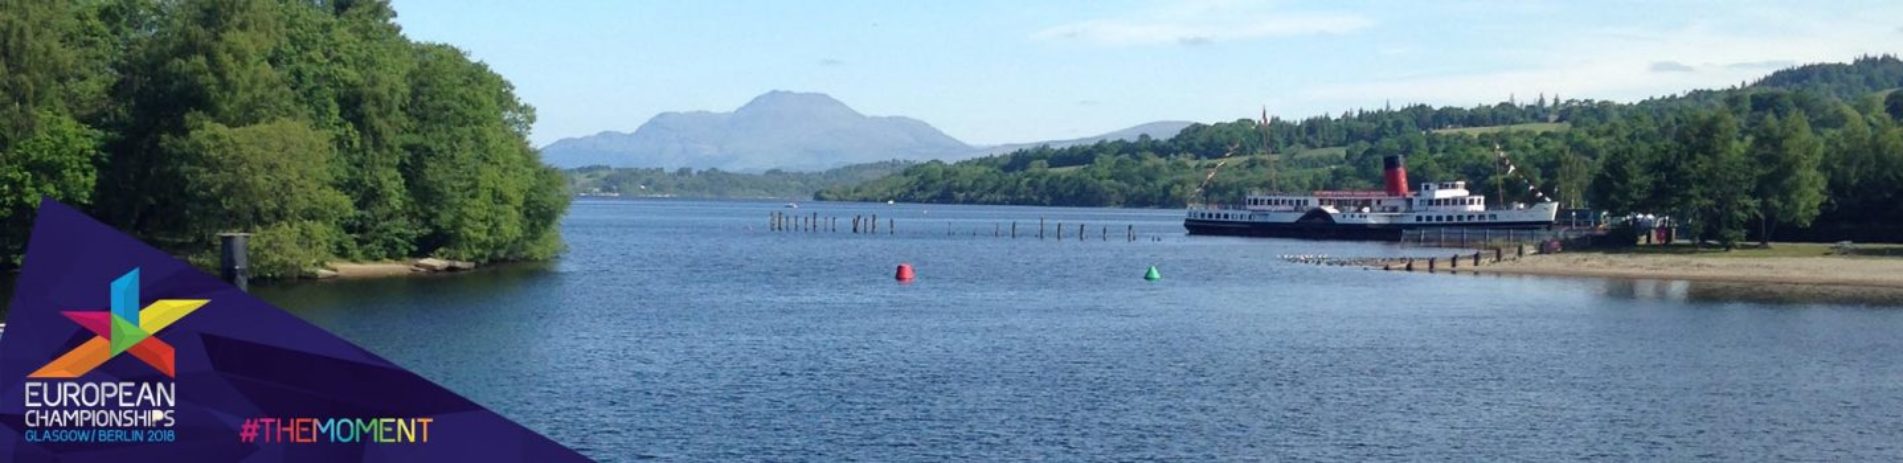 view-of-loch-lomond-wooded-shores-maid-of-the-loch-steamship-and-ben-lomond-in-the-distance-with-colourful-logo-of-european-championships-two-thousand-eighteen-in-bottom-left-corner